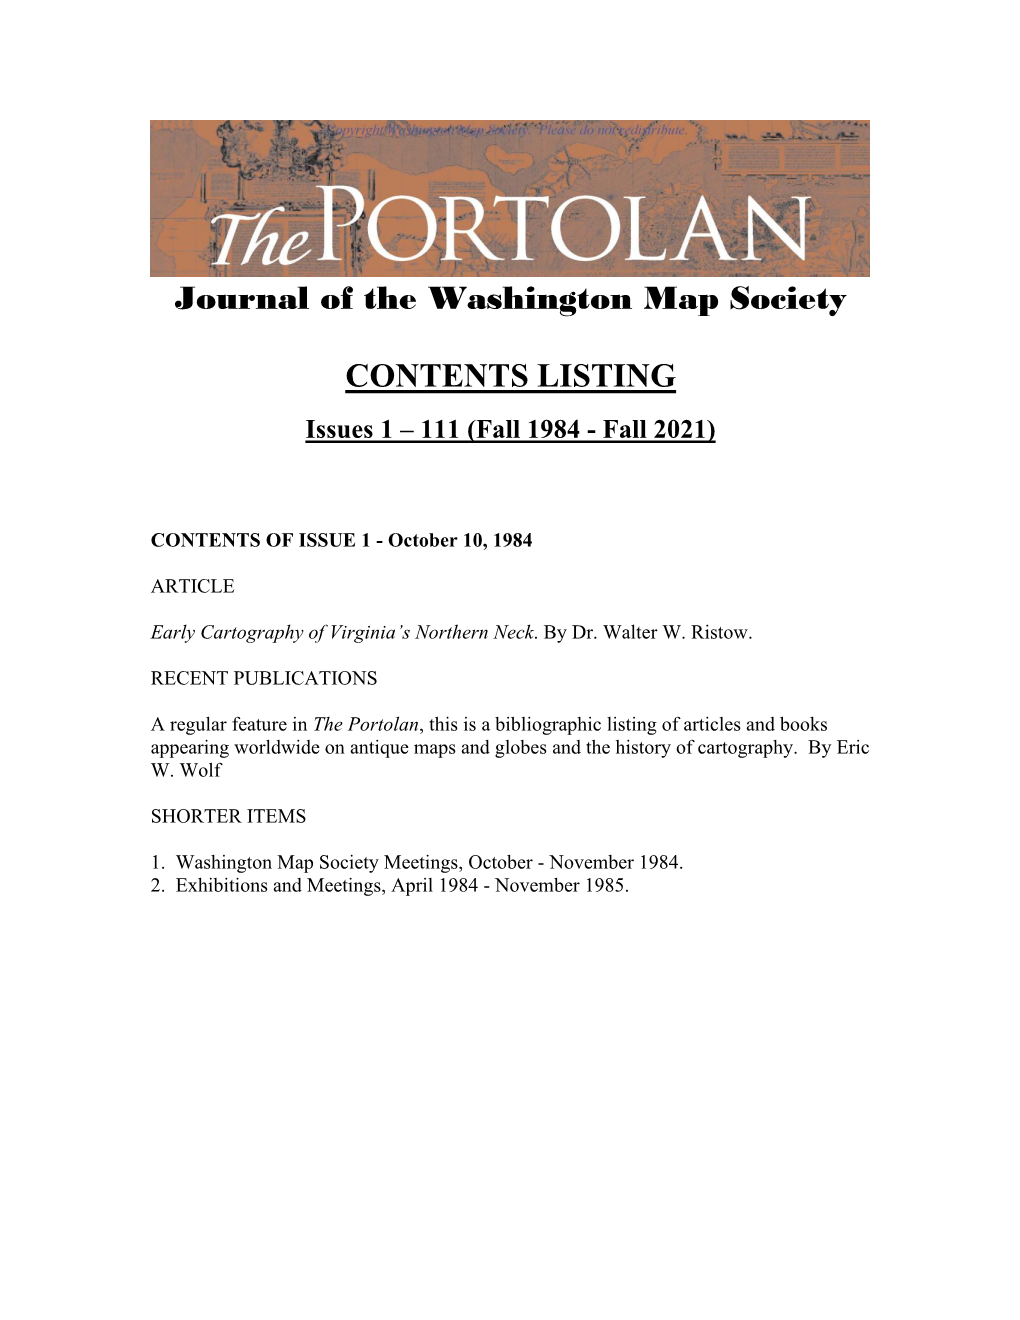 The Portolan, This Is a Bibliographic Listing of Articles and Books Appearing Worldwide on Antique Maps and Globes and the History of Cartography